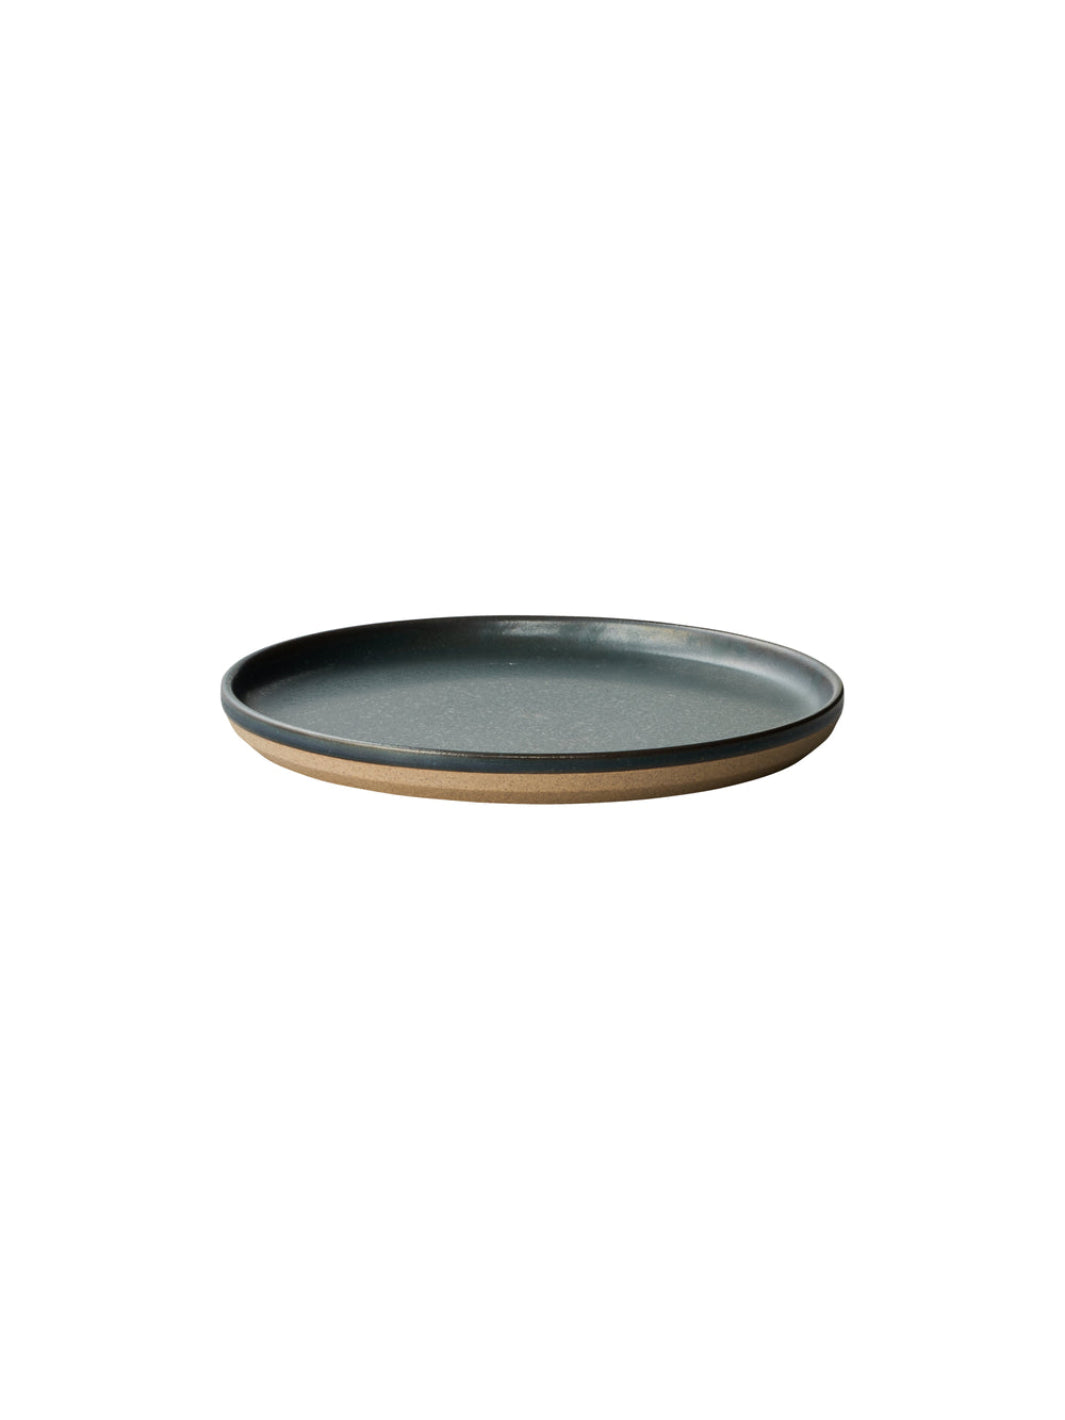 KINTO CERAMIC LAB Plate (200mm/8in) (3-Pack)